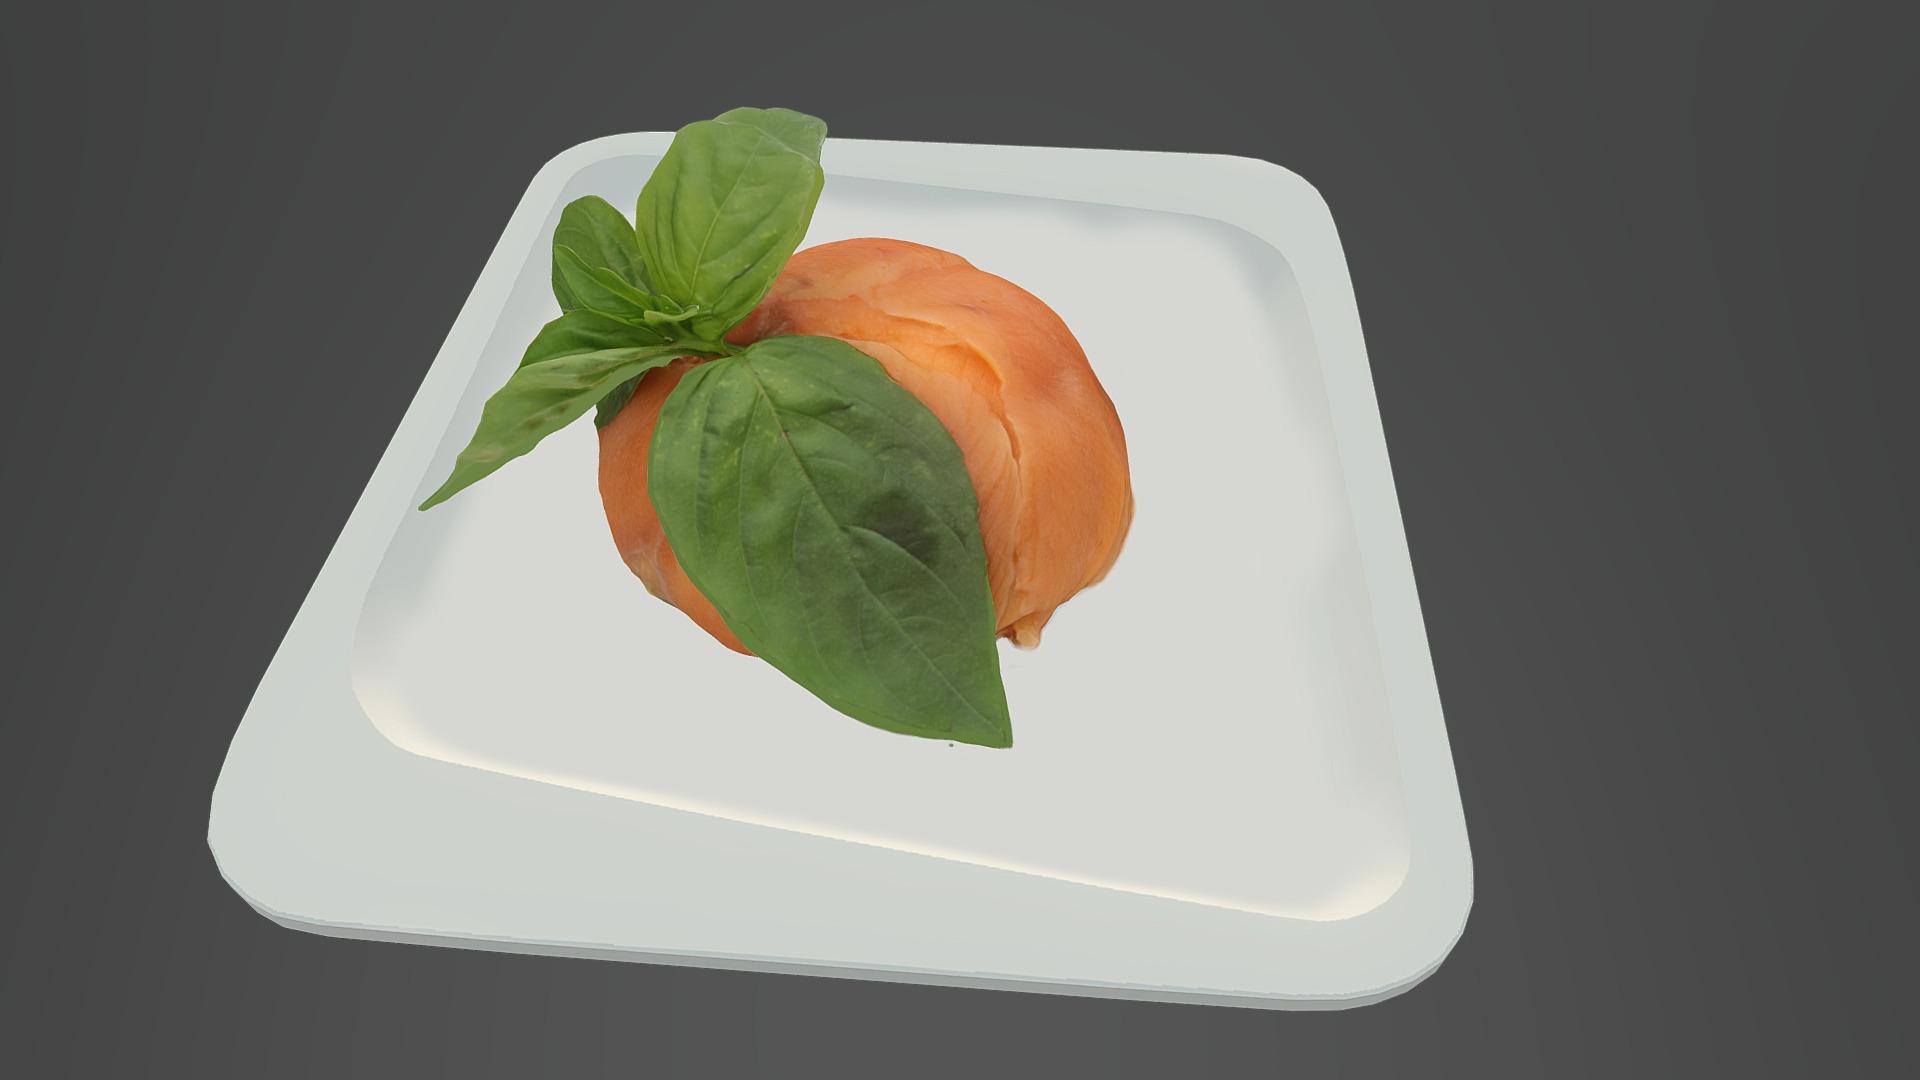 3D model 7Olimp - This is a 3D model of the 7Olimp. The 3D model is about a plate with food on it.